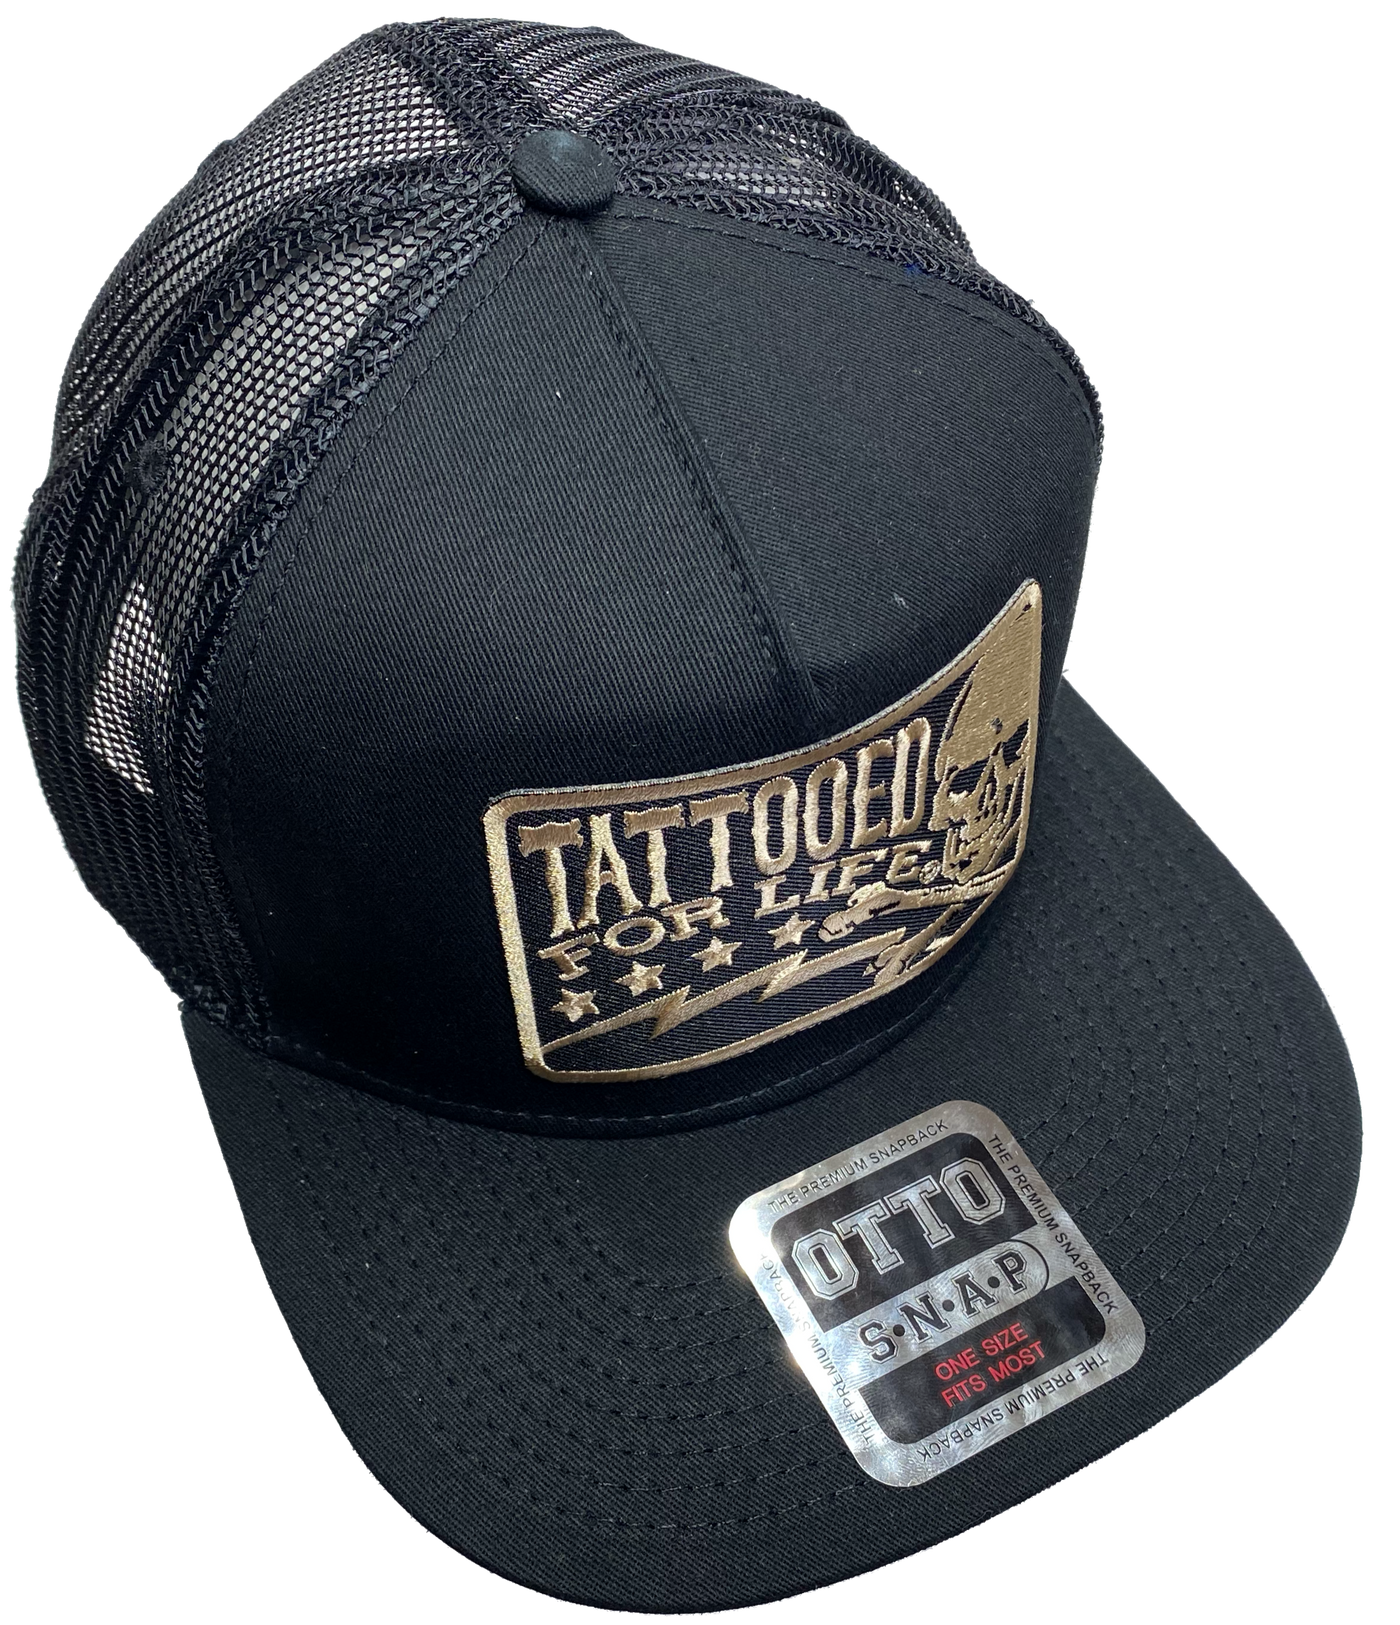 Flat Bill Cap with mesh back. Front has a Gold embroidered patch that says "Tattooed for Life" and has a skull graphic. Structured top to keep its shape. Sold at our shop just outside Nashville in Smyrna, TN.